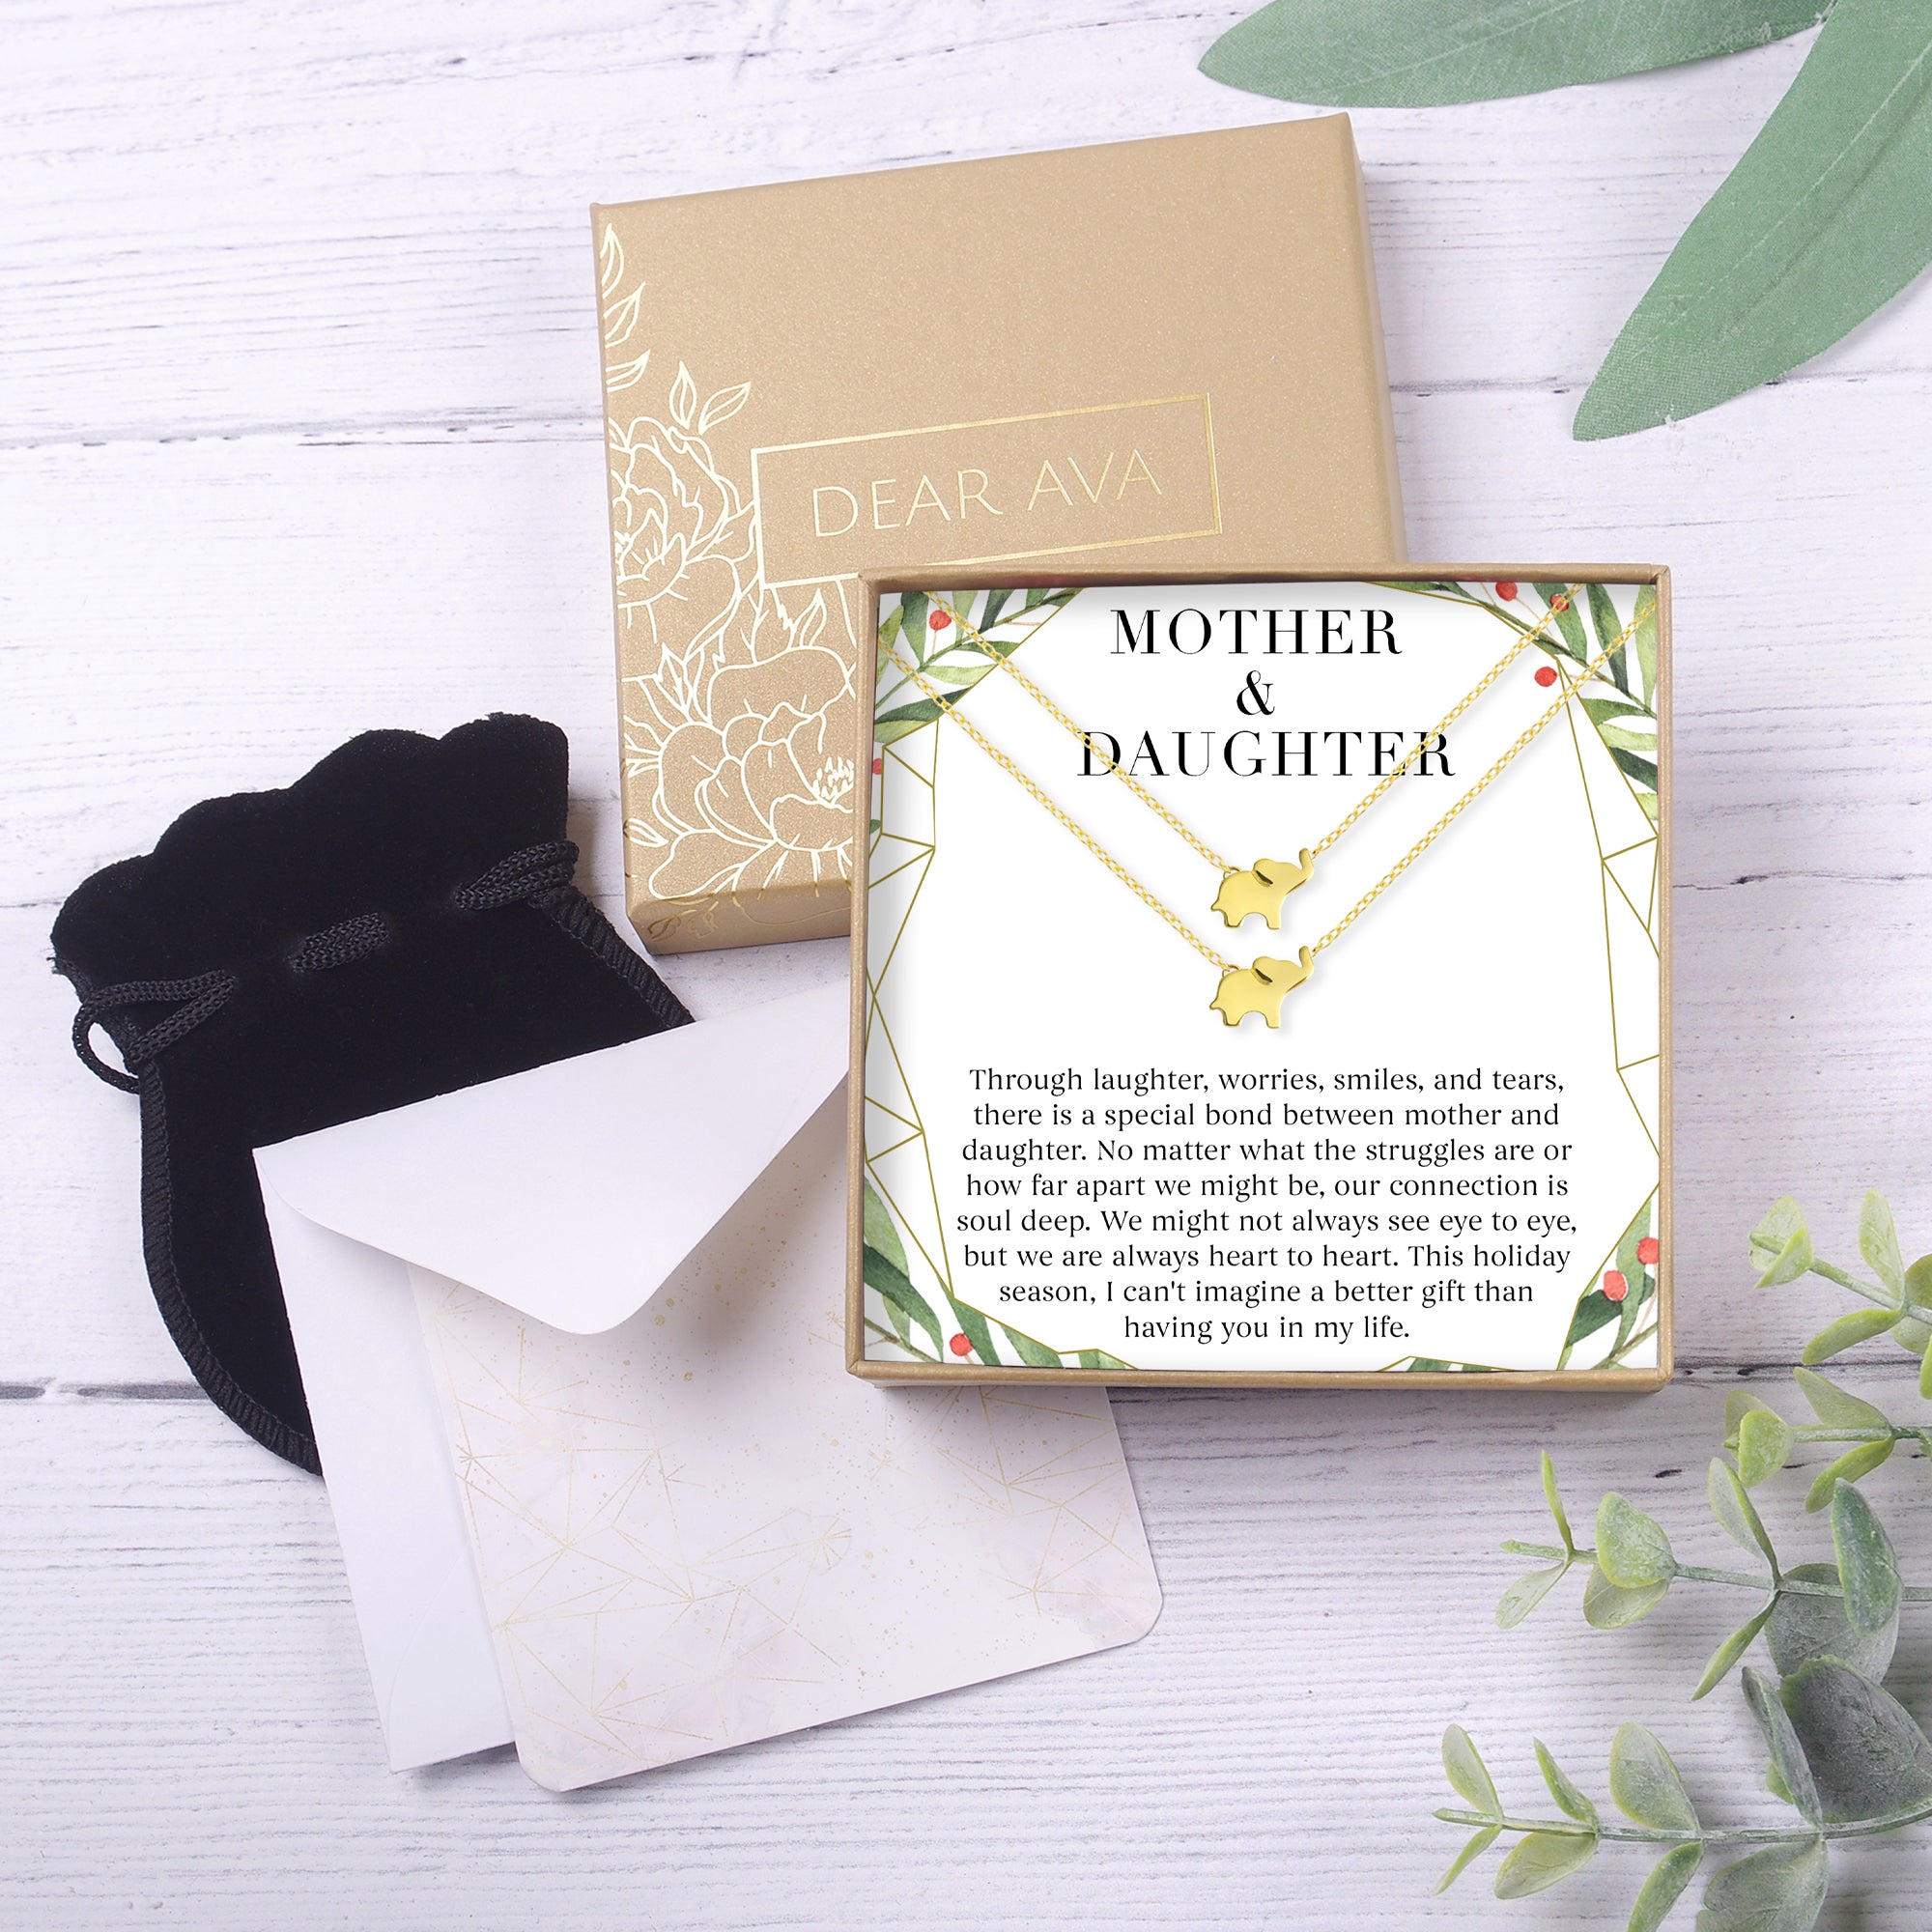 Mother and Daughter Christmas Card Necklace Jewelry Gift Set - Jewelry Gift  Set - Gift for Her - Gift for Mom and Daughter - Holiday Matching Heart